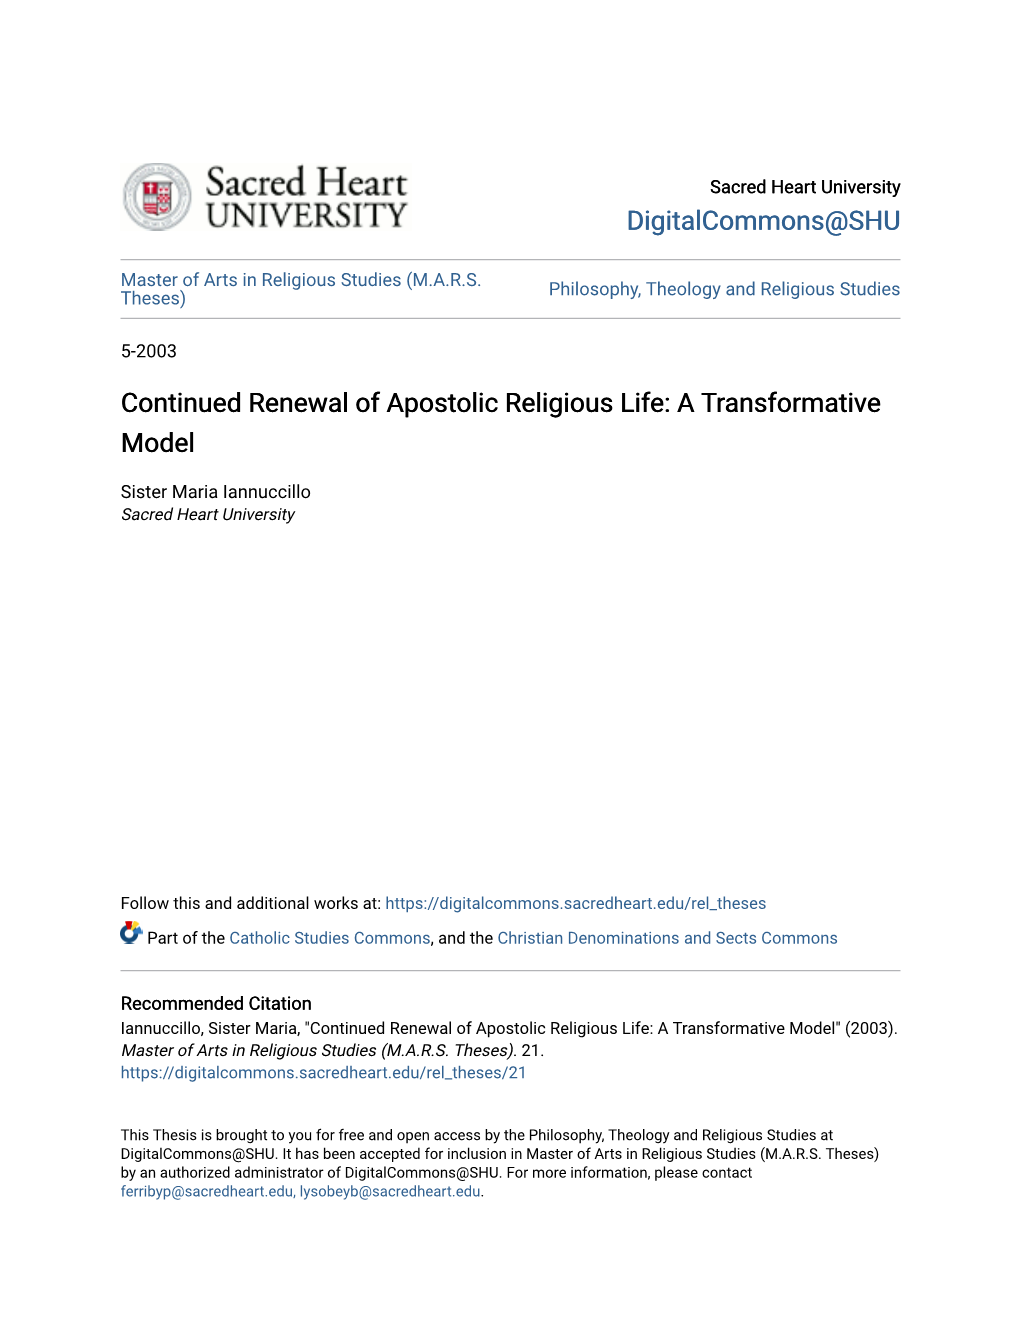 Continued Renewal of Apostolic Religious Life: a Transformative Model